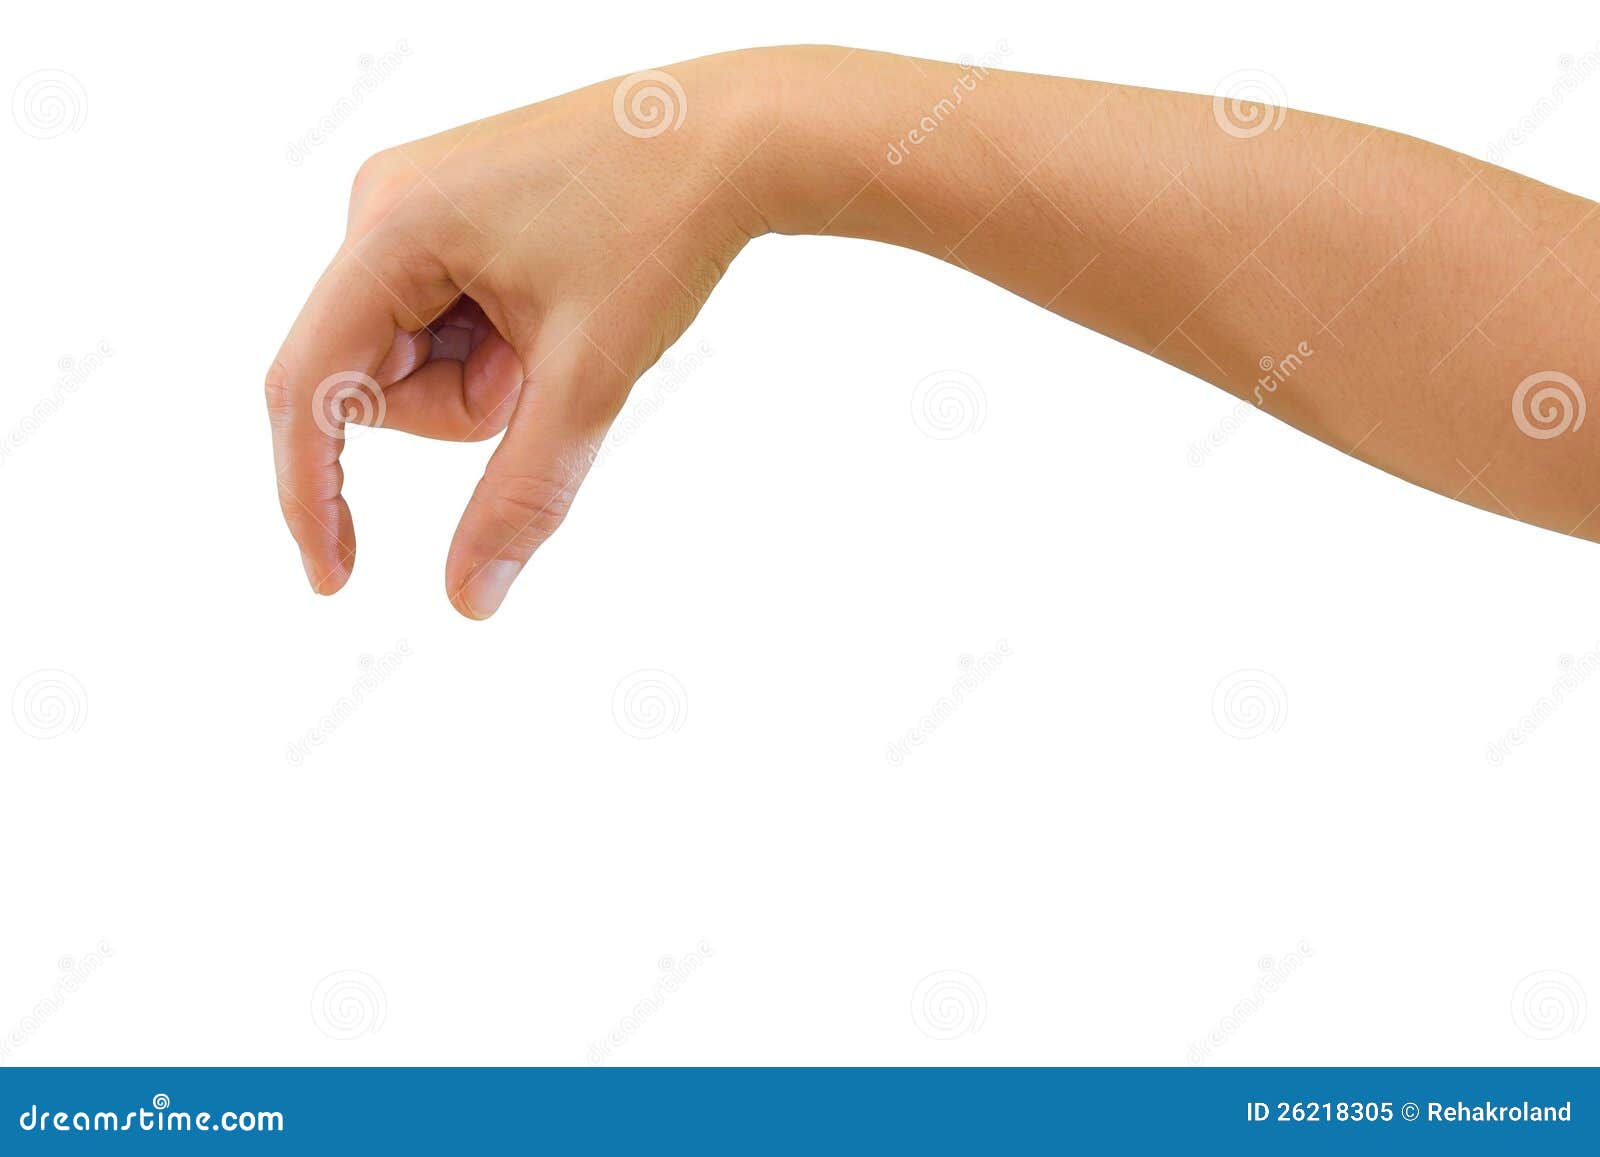 hand to hold small object